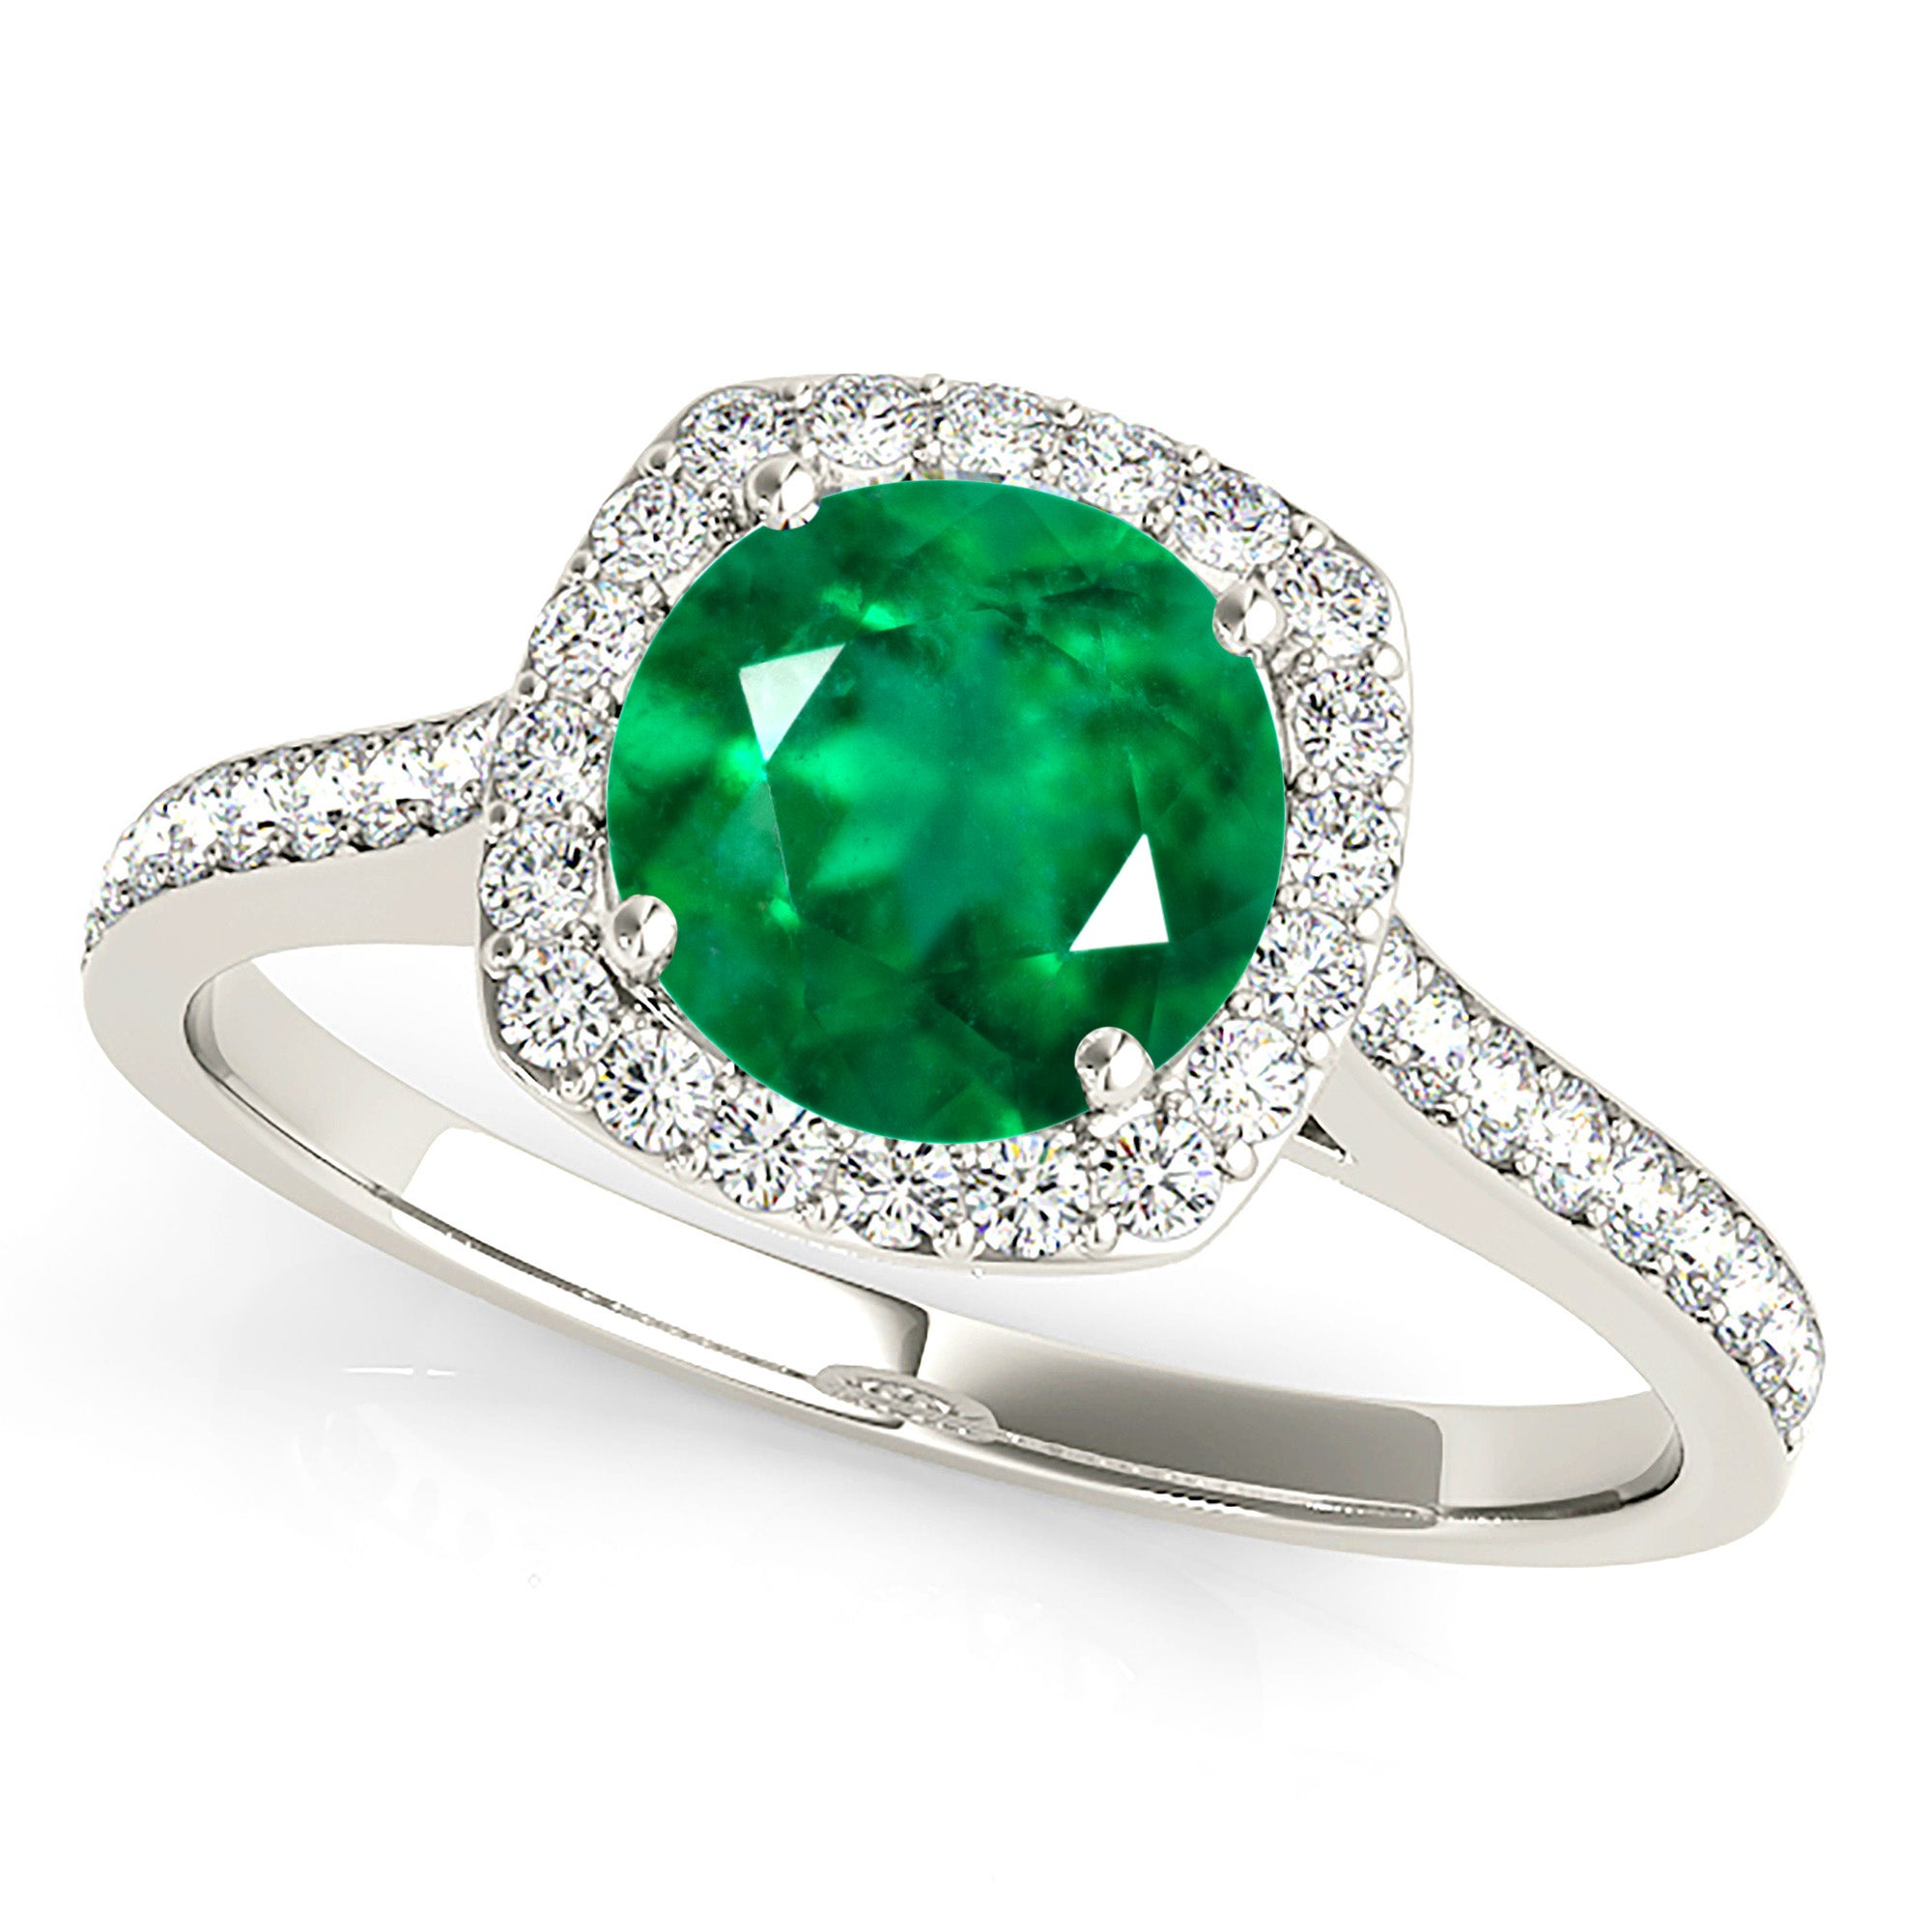 1.68 ct. Genuine Emerald Ring With 0.35 ctw. Diamond Halo and Delicate Diamond Band-in 14K/18K White, Yellow, Rose Gold and Platinum - Christmas Jewelry Gift -VIRABYANI